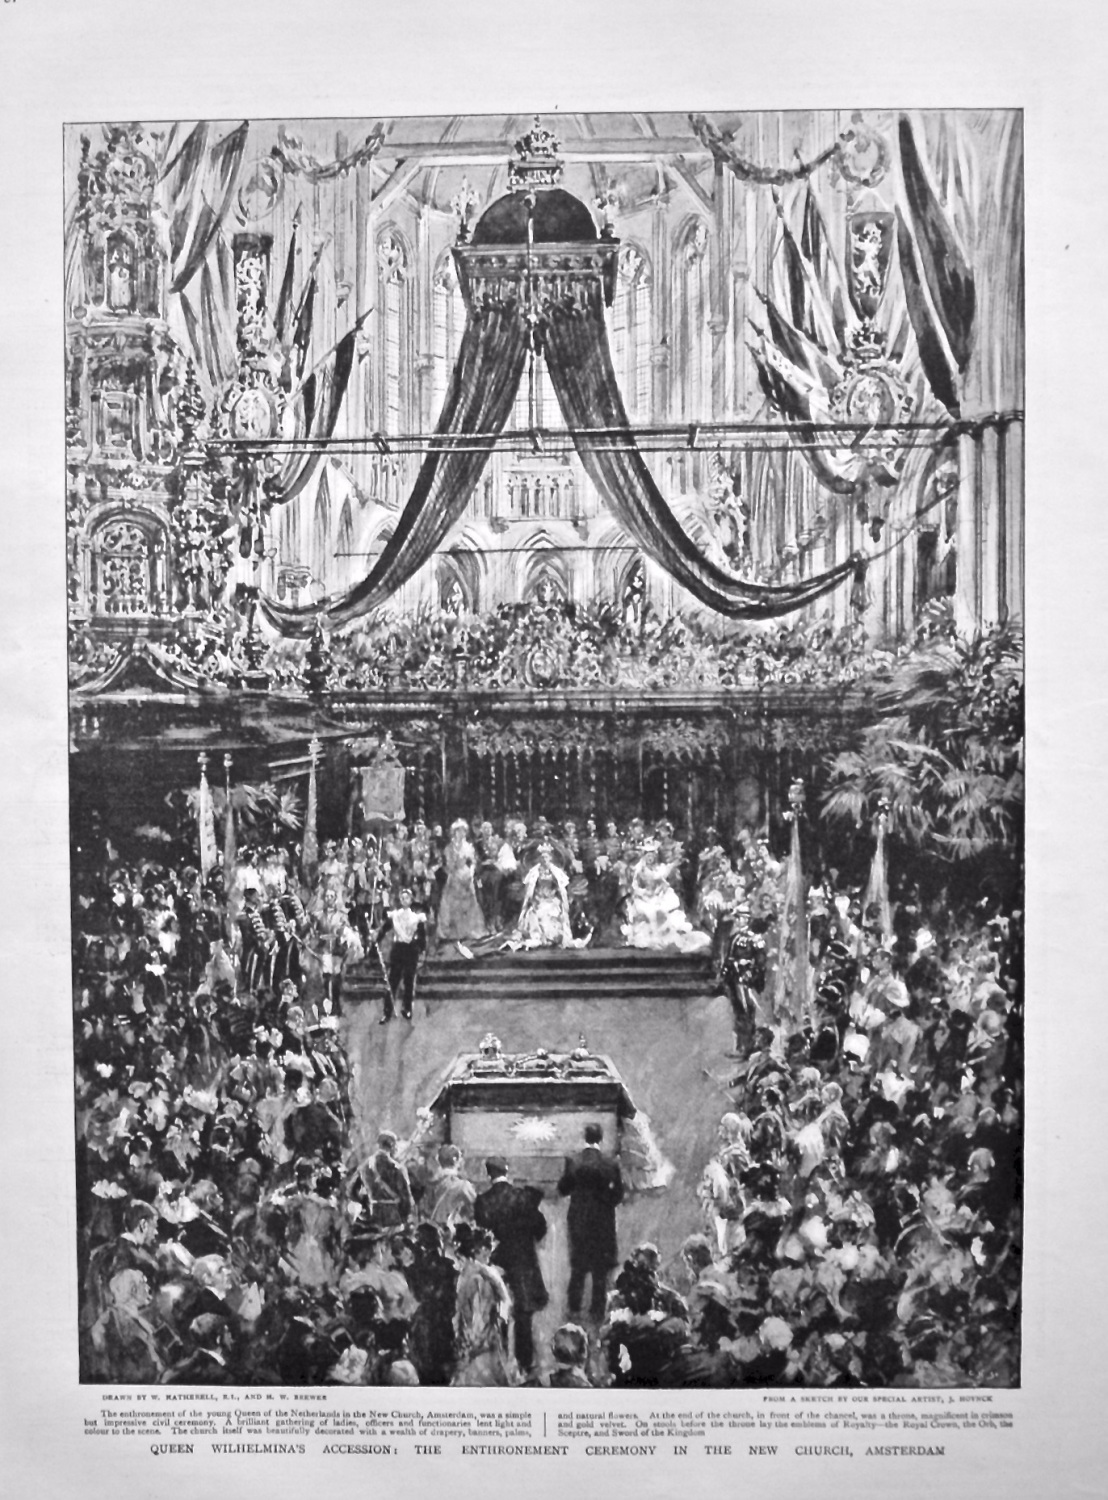 Queen Wilhelmina's Accession : The Enthronement Ceremony in the New Church,